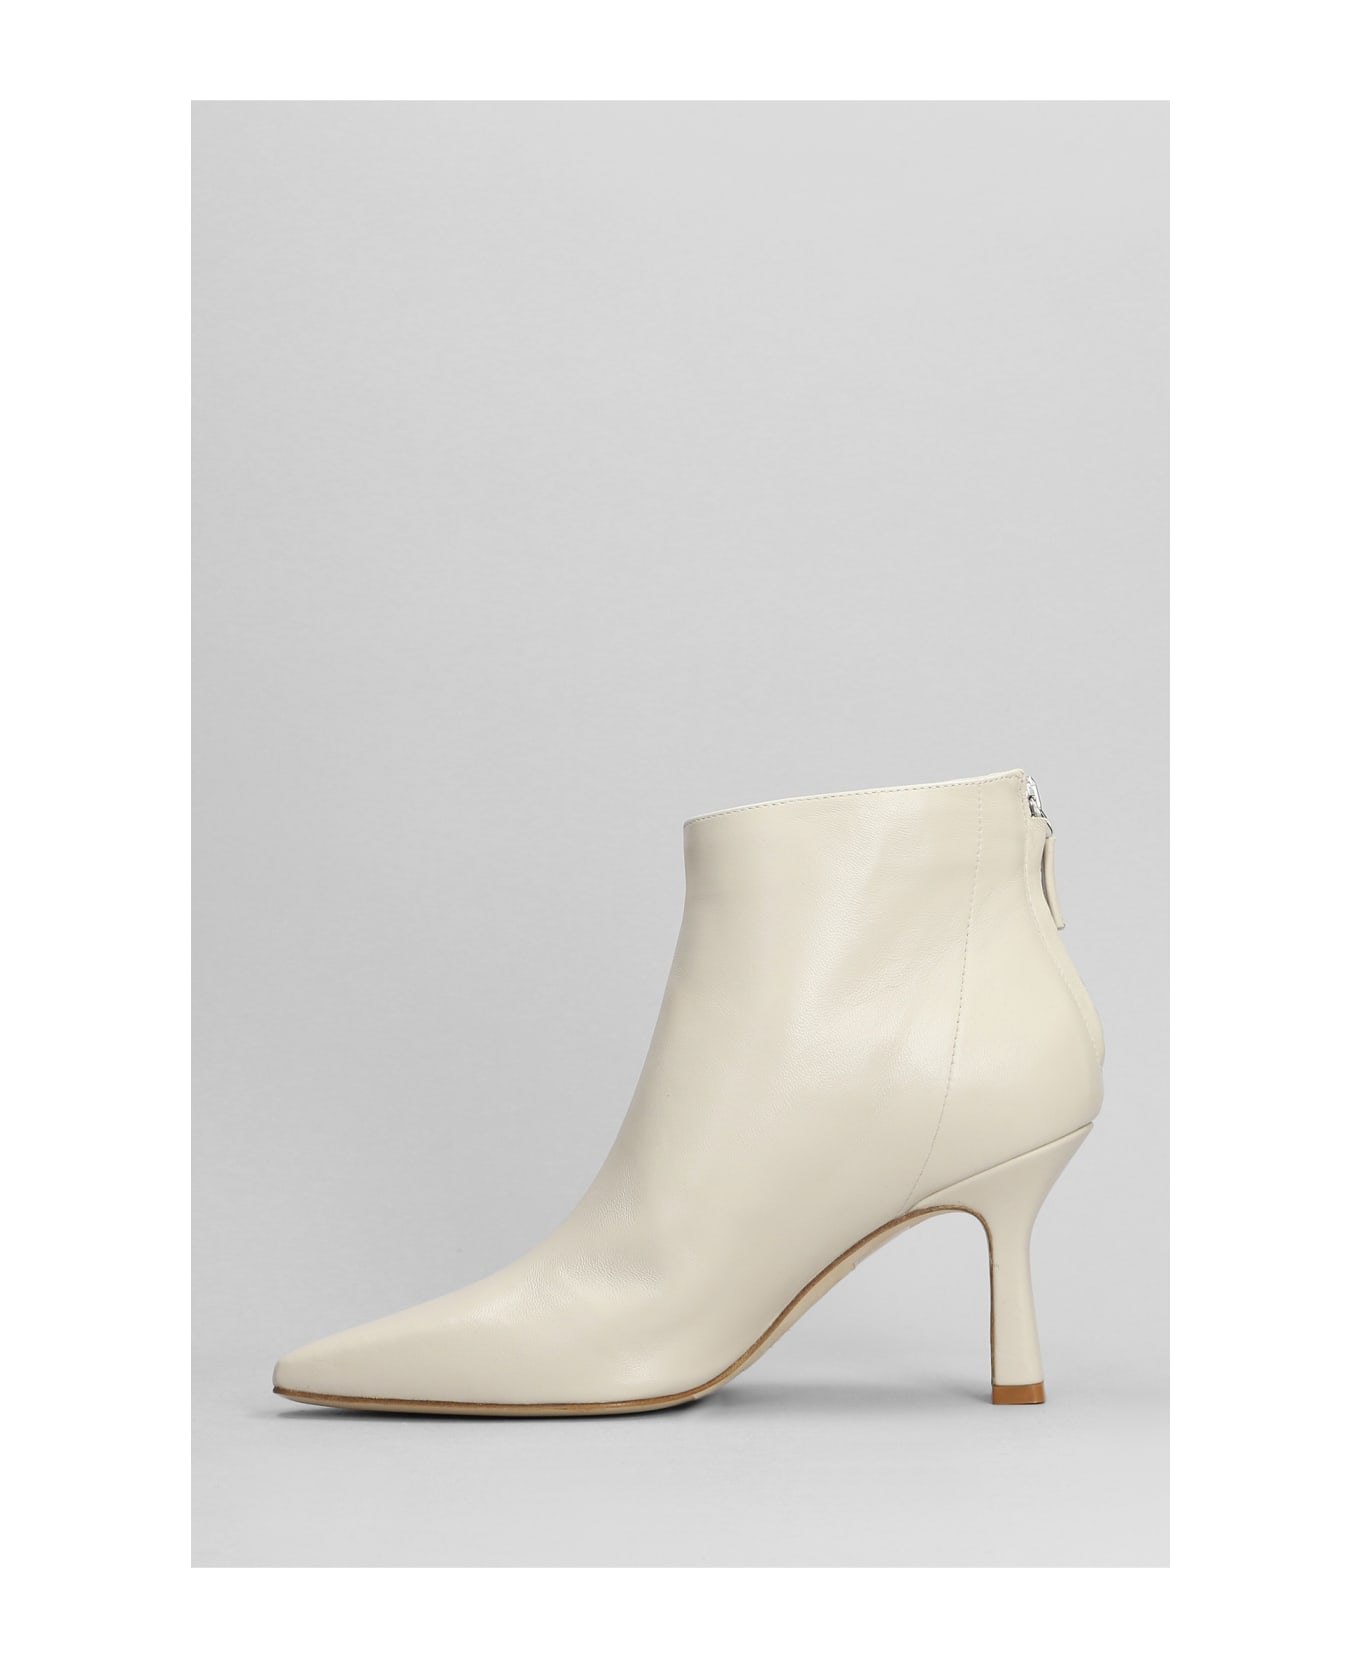 The Seller High Heels Ankle Boots In Beige Leather - beige ブーツ